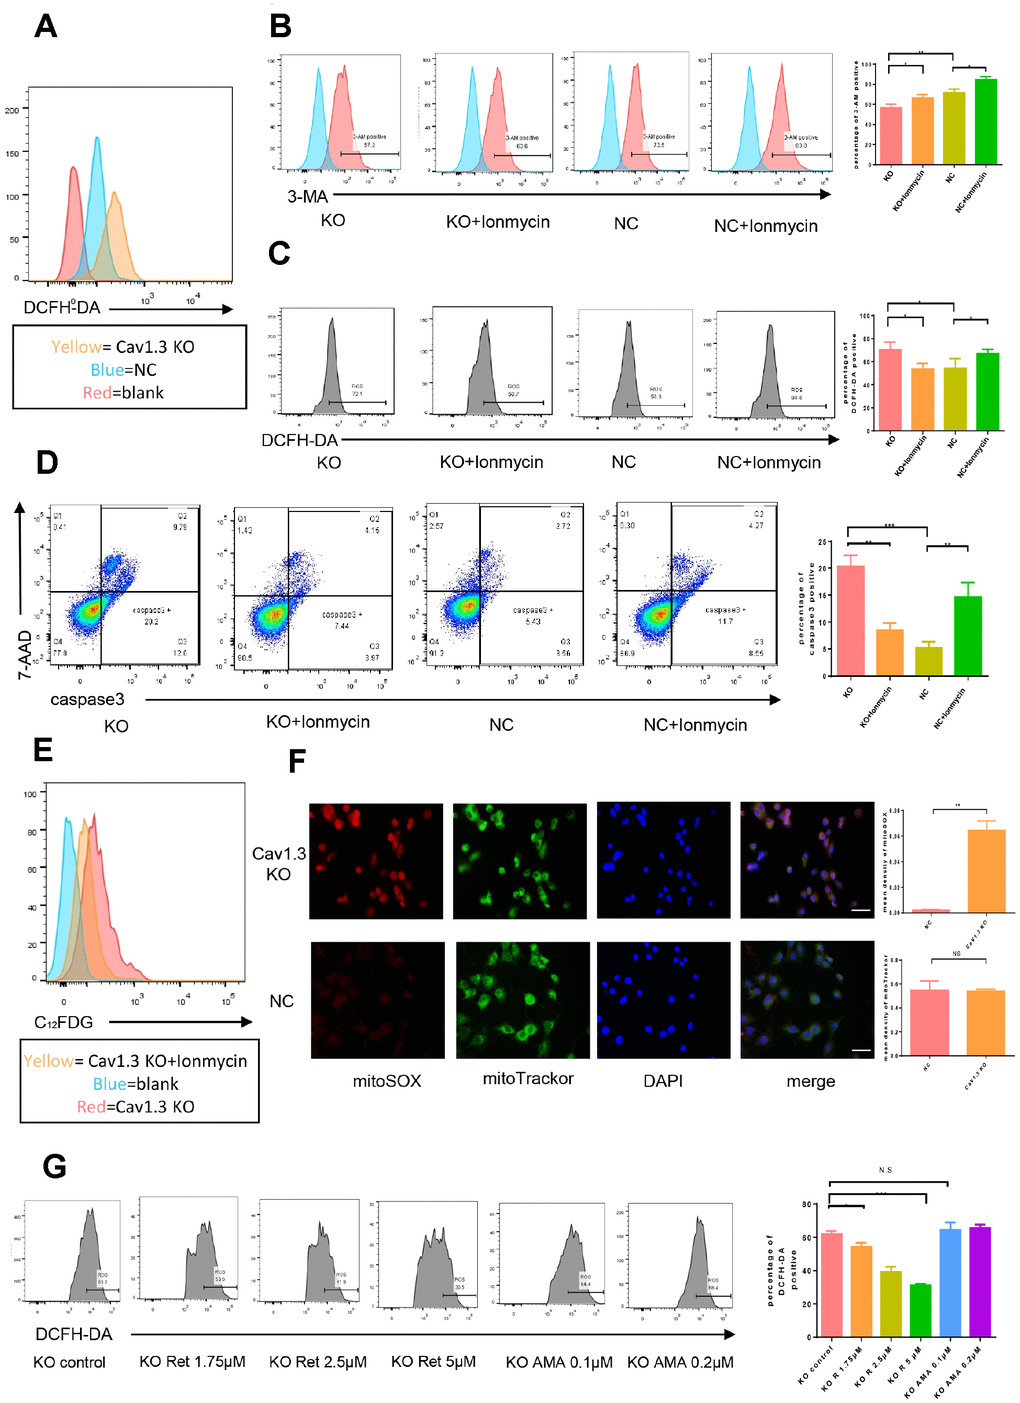 Cav1.3 knock out decrease intra cellular calcium and subsequently result in reduction of complex I derived ROS inactivation. (A) intra-cellular ROS detection by flow cytometry (n=3). (B–E) the intra cellular calcium, intra cellular ROS, caspase-3/7-AAD staining and C12FDG staining of NC and KO HEI-OC1 cells with or without Ionmycin (n=3). (F) immunofluorescence of mitoSOX (red) and mitotrackor (green) in NC and KO HEI-OC1 cells, nuclei was visualized by DAPI (magnification, ×400, scal bar: 50μm), the right panels are the quantitative analysis of mitoSOX (top) and mitoTrackor (bottom). (G) the intra cellular ROS of KO HEI-OC1 cells with or without gradient Retenone (Ret) and Antimycin A (AMA)(n=3), the right panel is the quantitative analysis. Error bars represent mean ± s.d.; *PB, C, D, G).